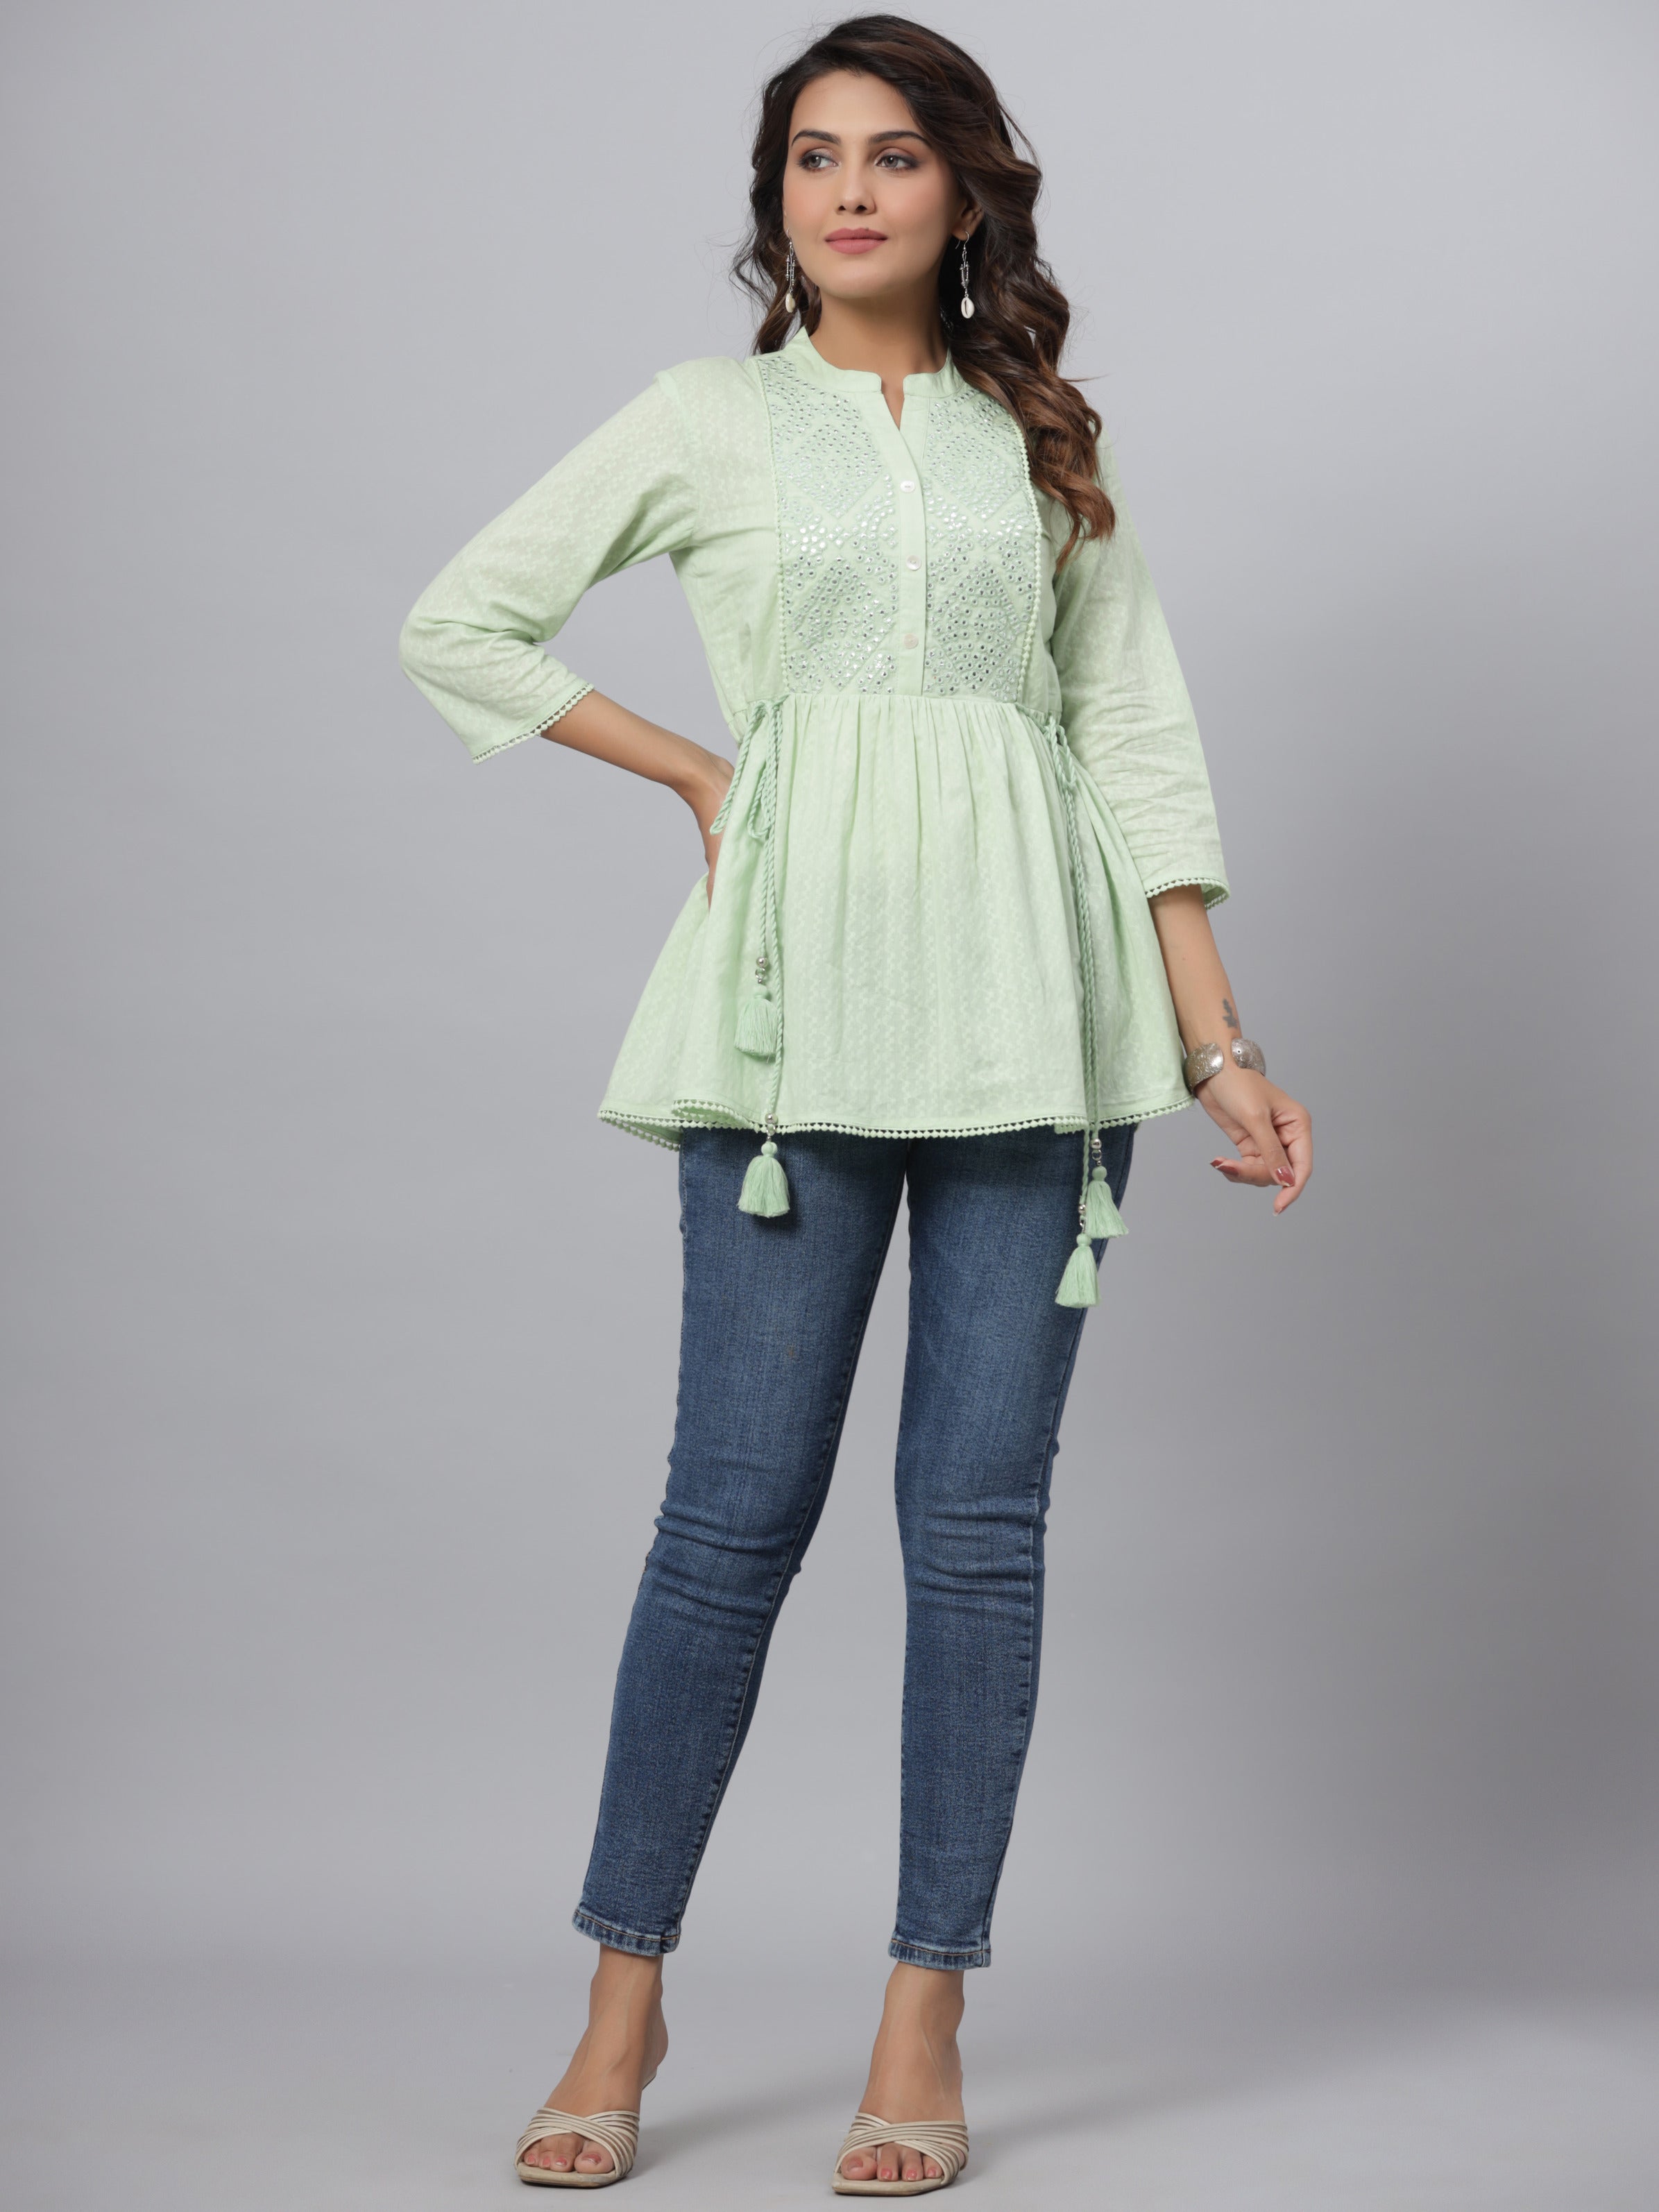 Juniper Women's Green Cotton Dobby Solid With Embroidery Fit & Flare Tunic